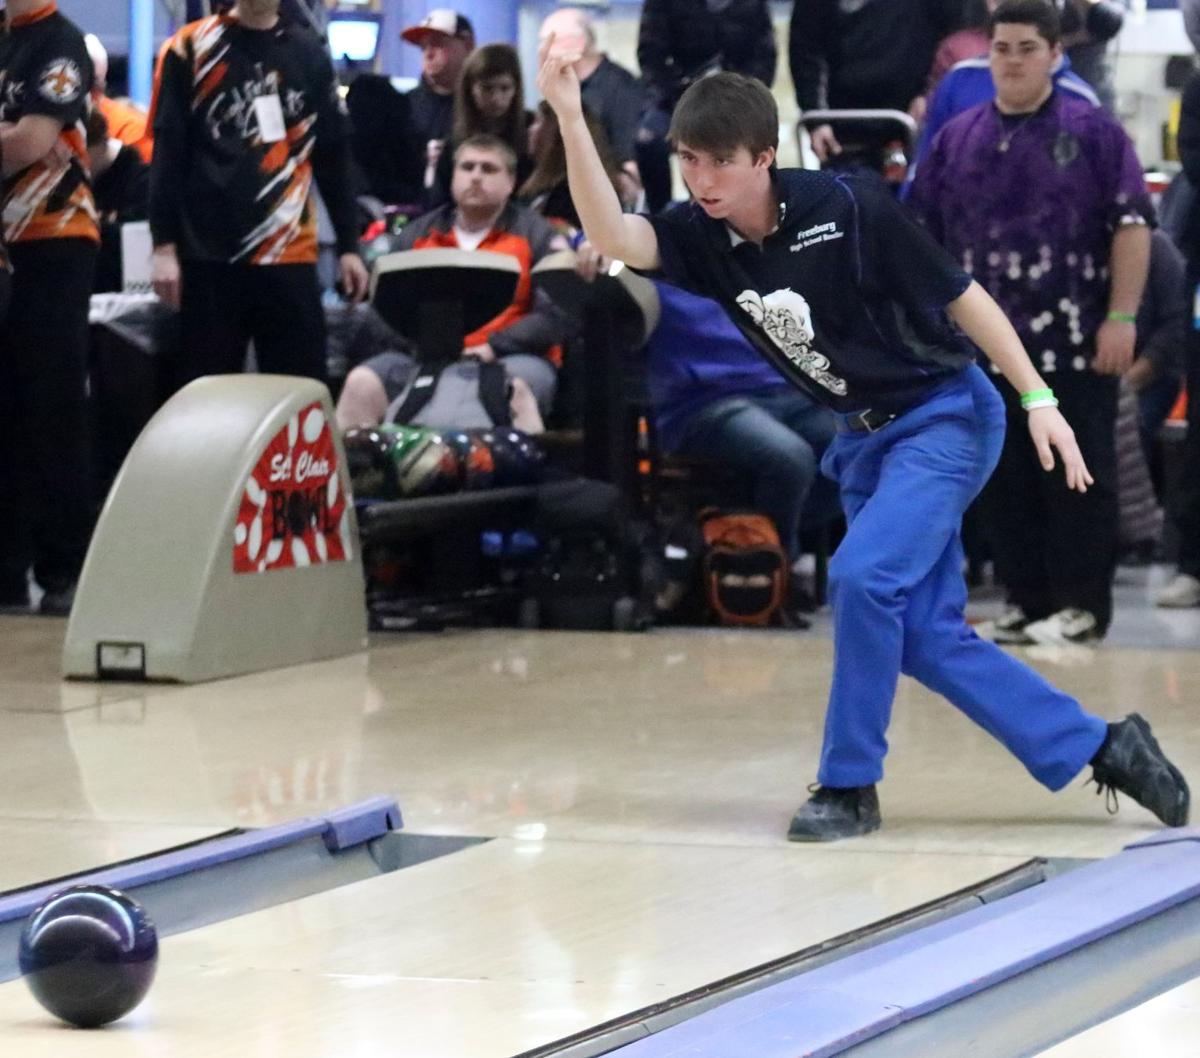 Illinois State Bowling Finals Day 2 Boys Bowling